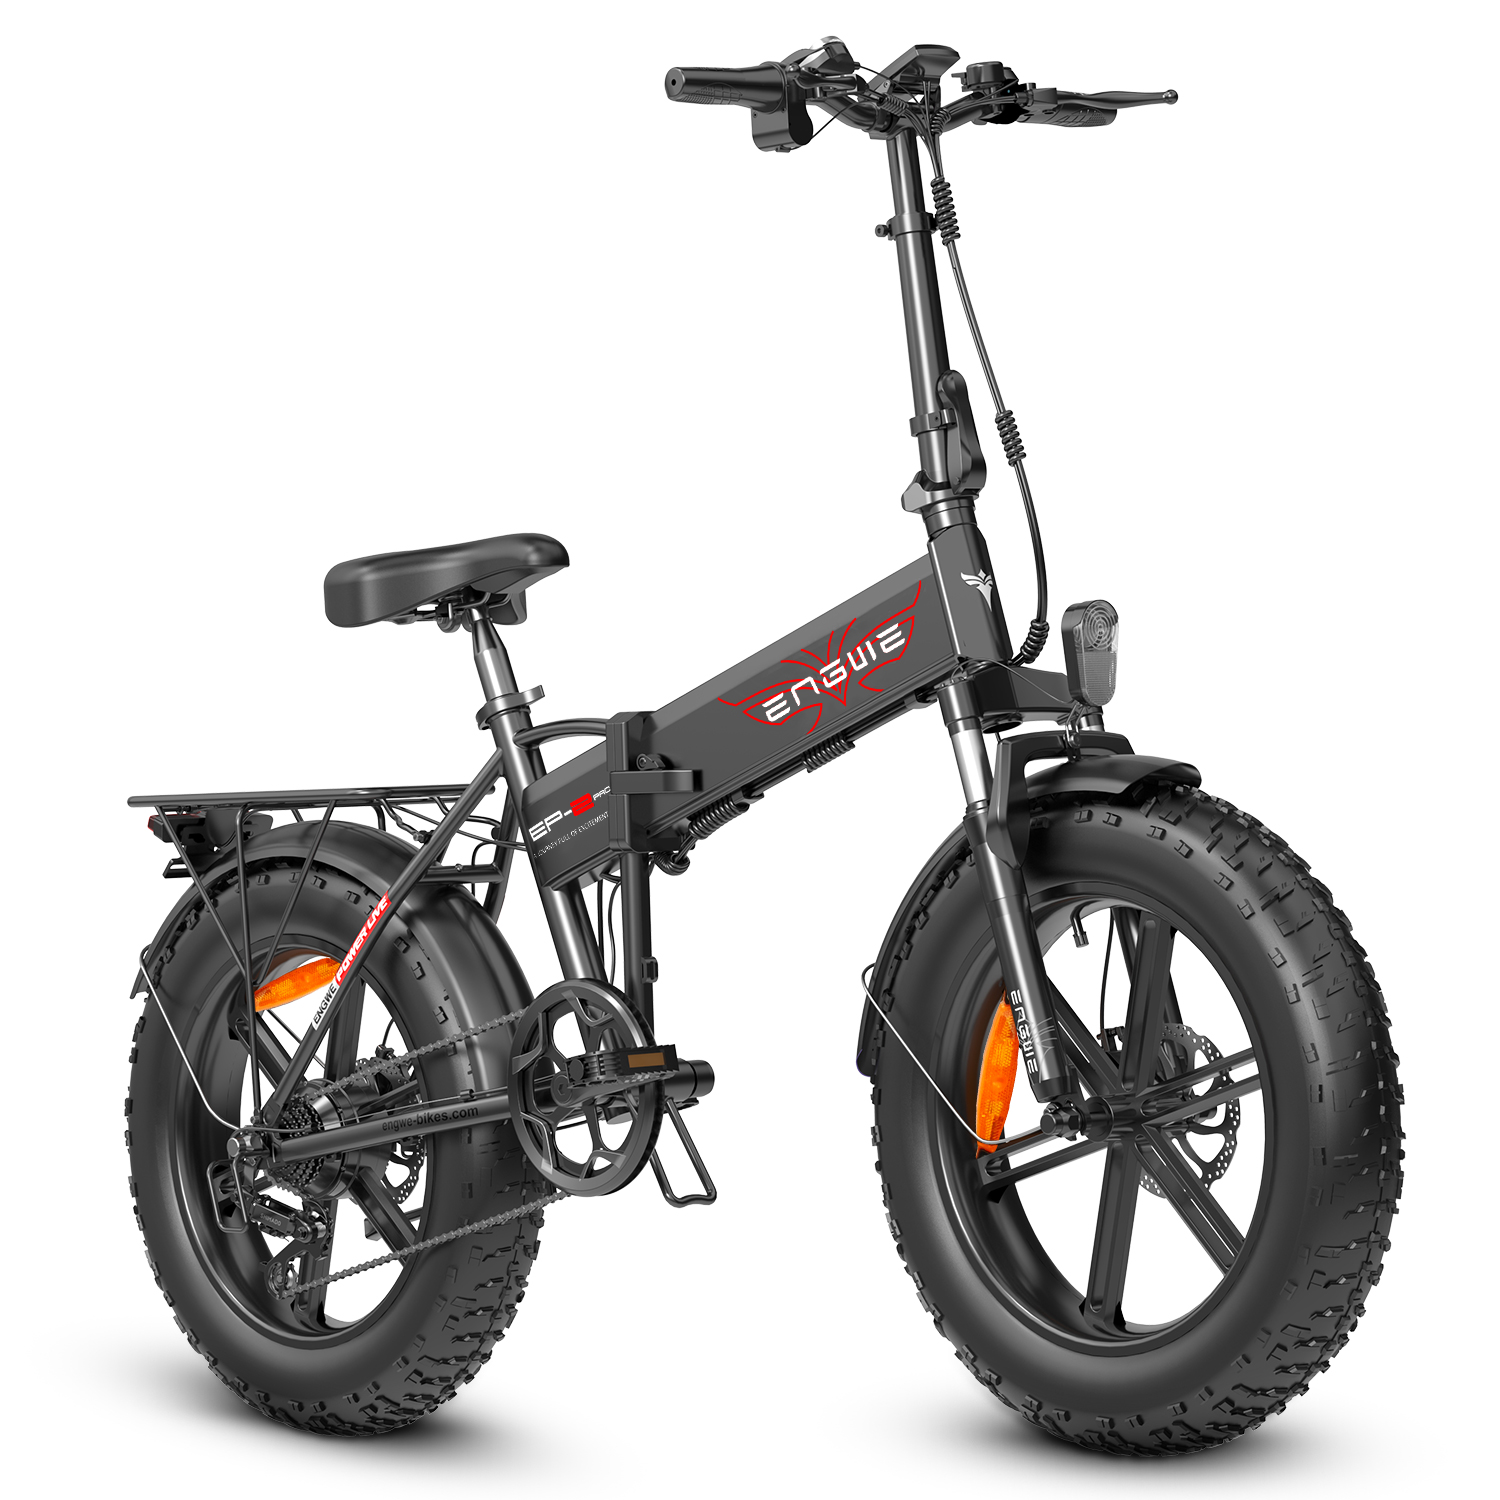 Find [EU DIRECT] ENGWE EP-2 PRO 2022 Version 13Ah 750W Fat Tire Folding Electric Bike 20inch 60-80km Mileage Range E Bike for Mountain Snowfield Road for Sale on Gipsybee.com with cryptocurrencies